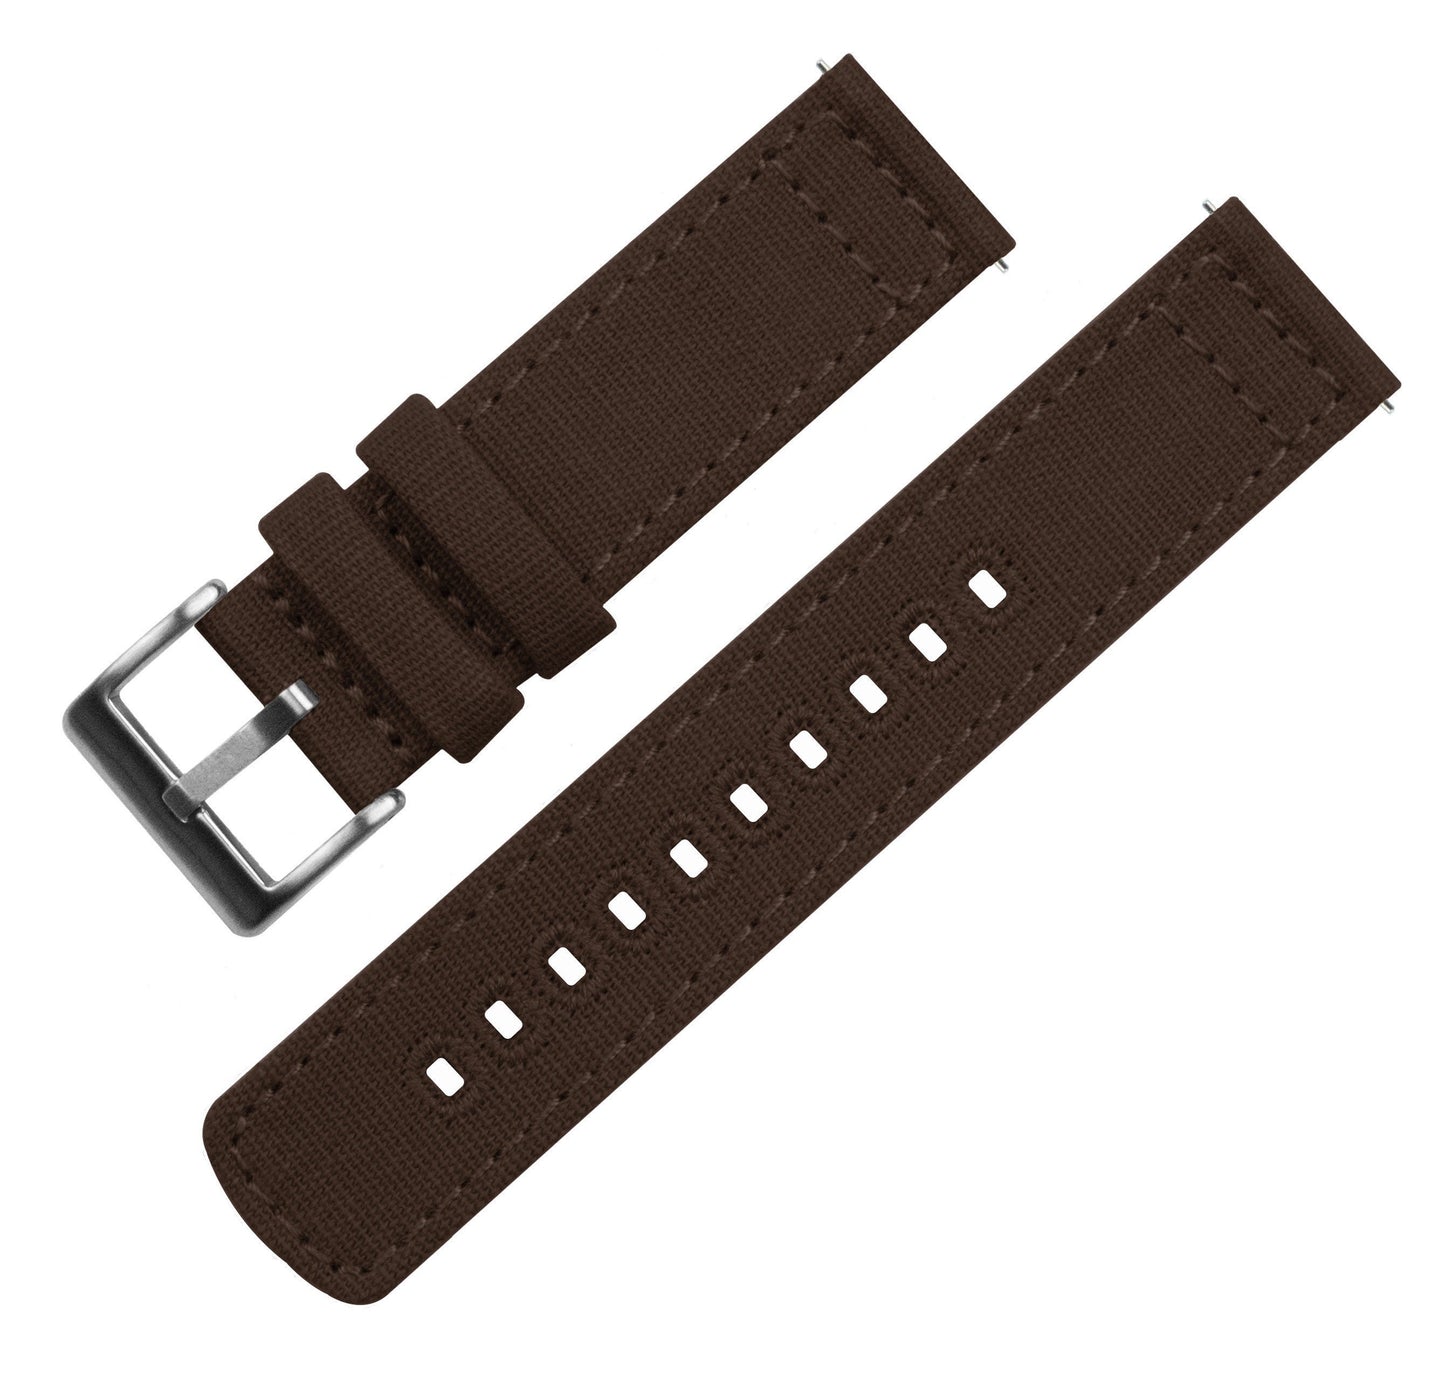 Pebble Smart Watches  | Chocolate Brown Canvas - Barton Watch Bands